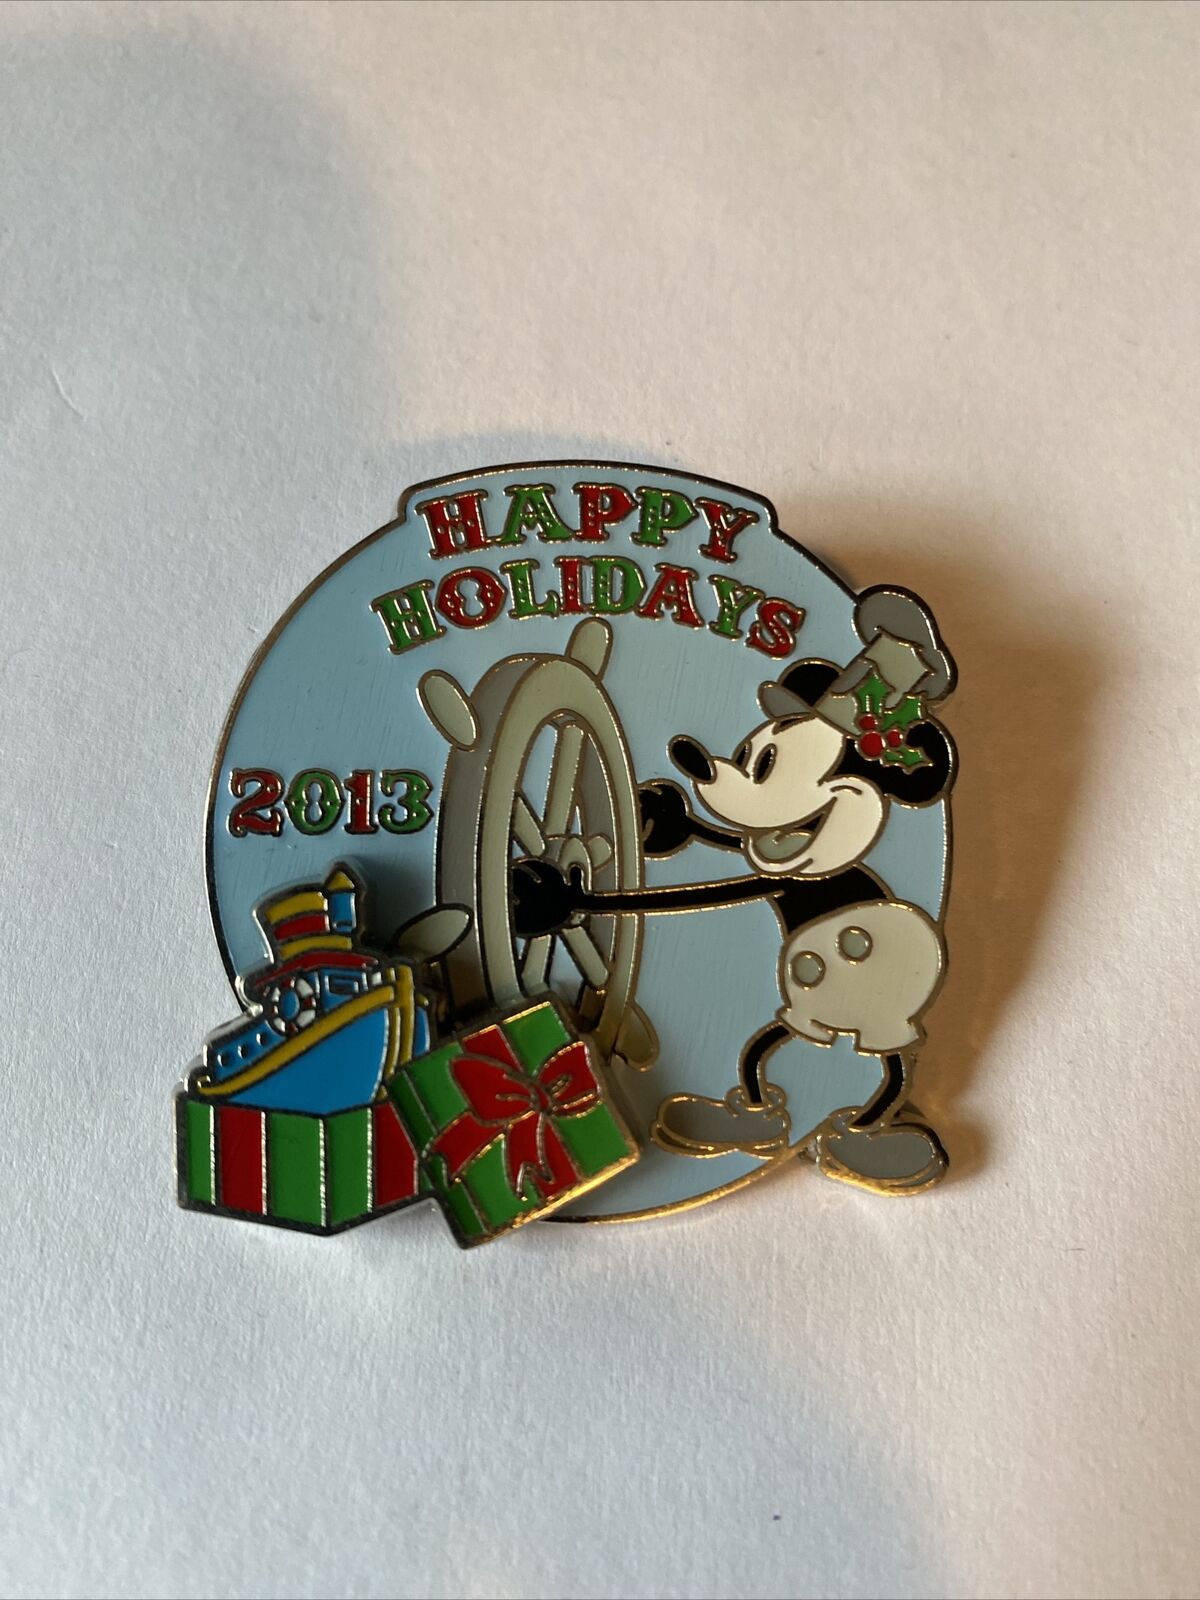 Disney Pin 99181 Cast Member Happy Holidays 2013 Steamboat Willie Mickey Le 1000